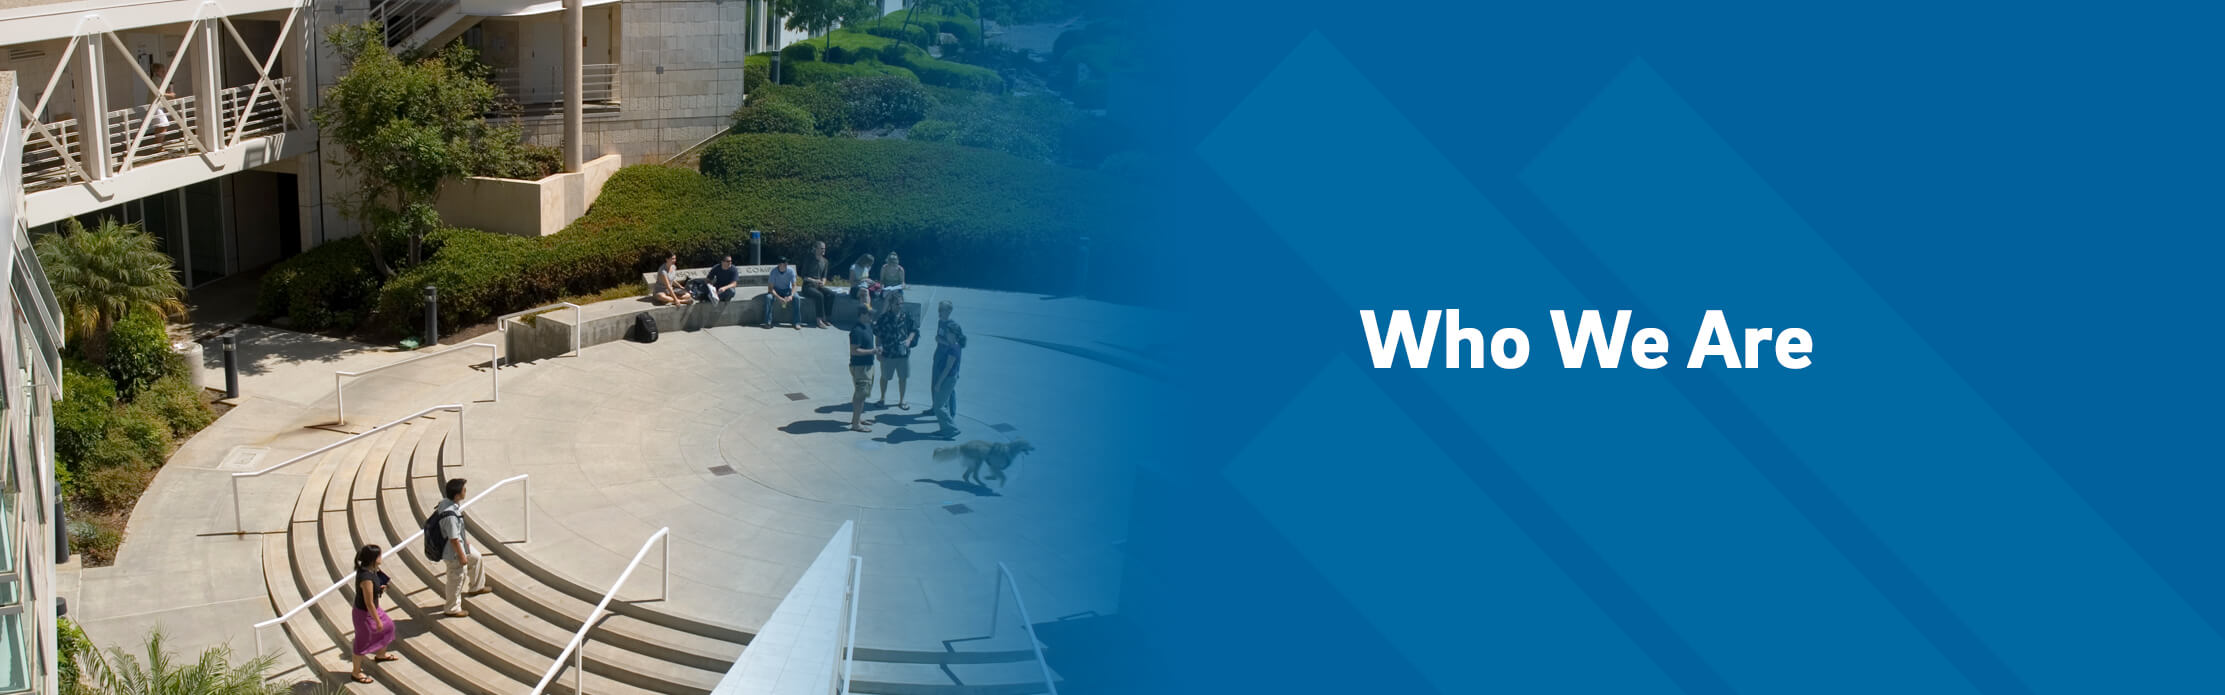 Image of the school's plaza with people walking/standing, with a blue color overlay on the right, including a branding element of UC San Diego shaped as a trident